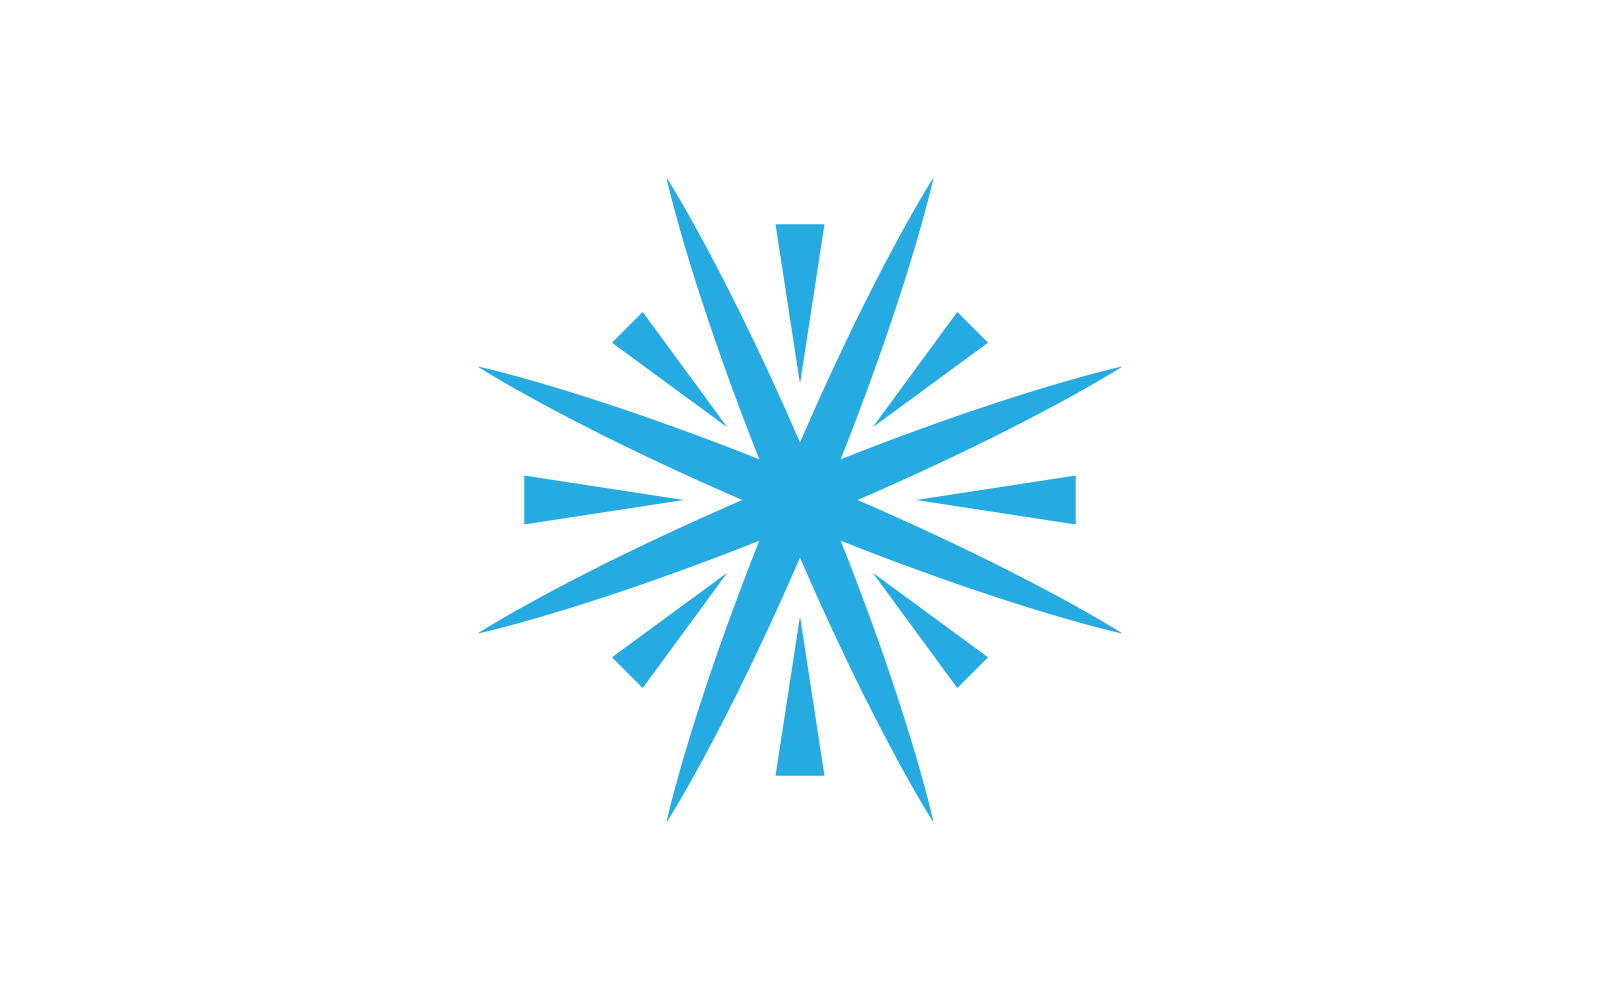 Snowflakes icon and symbol ilustration vector design template